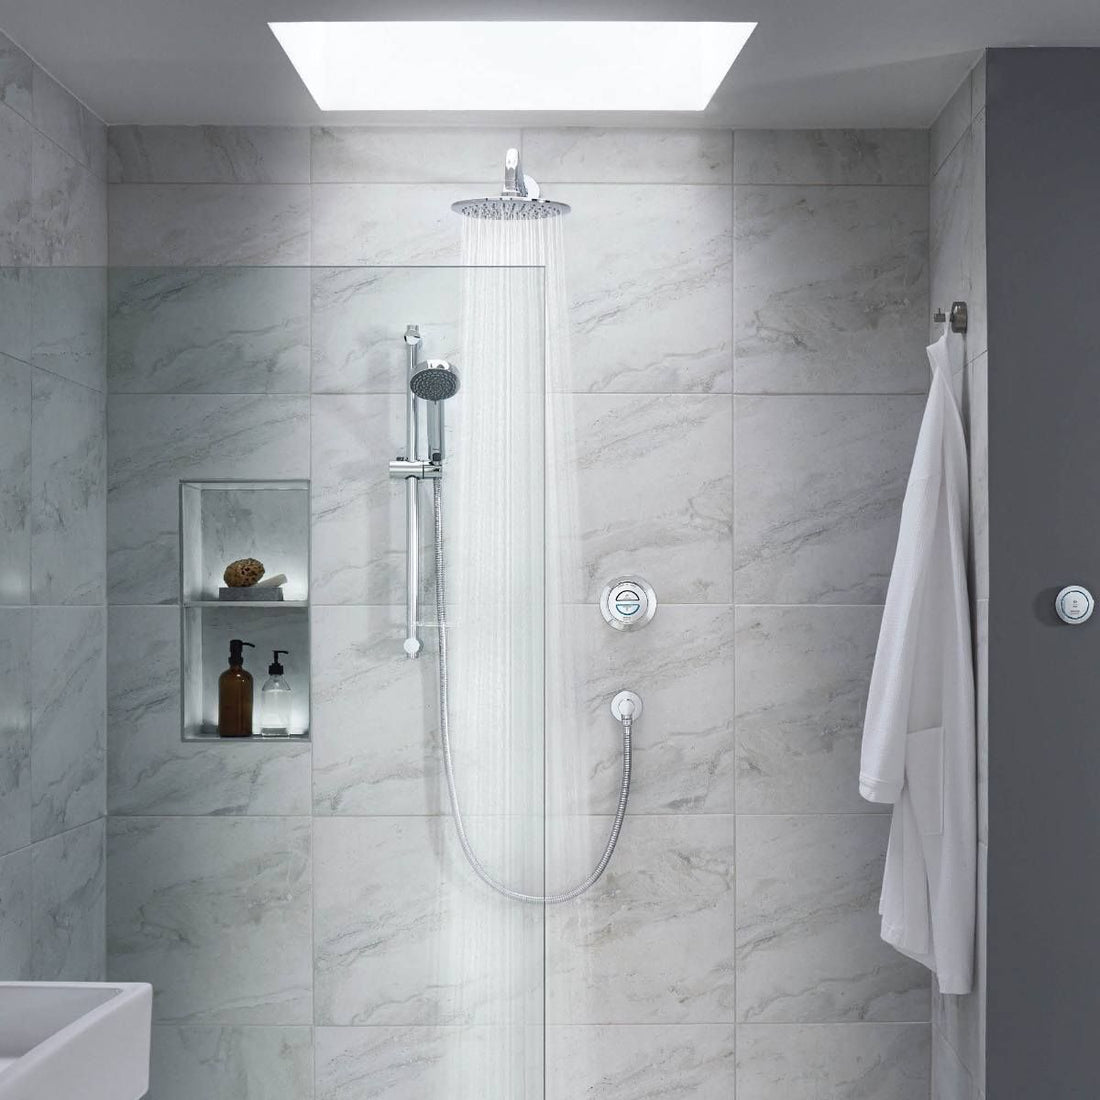 Aqualisa Quartz Classic Smart Shower - Concealed With Adjustable &amp; Wall Fix Head against white panel wall QZD.A1.BV.DVFW.20